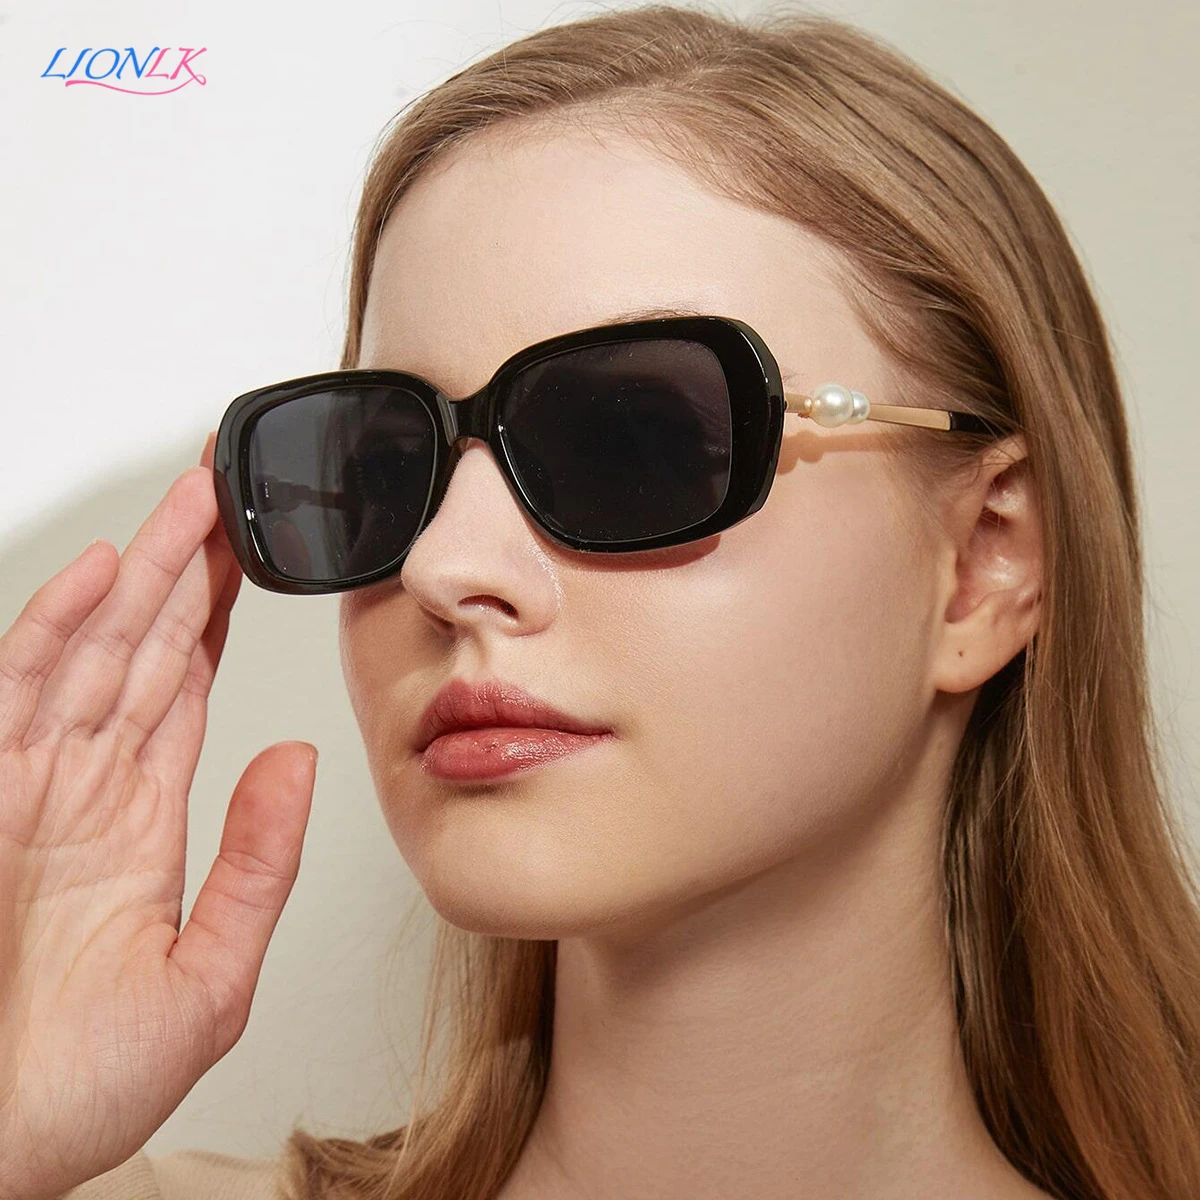 

LIONLK Fashion Pearl Oversized Frame Ladies Sunglasses Retro Style Sunscreen Eyepiece 2021 Luxurious Exquisite New Glasses Pink